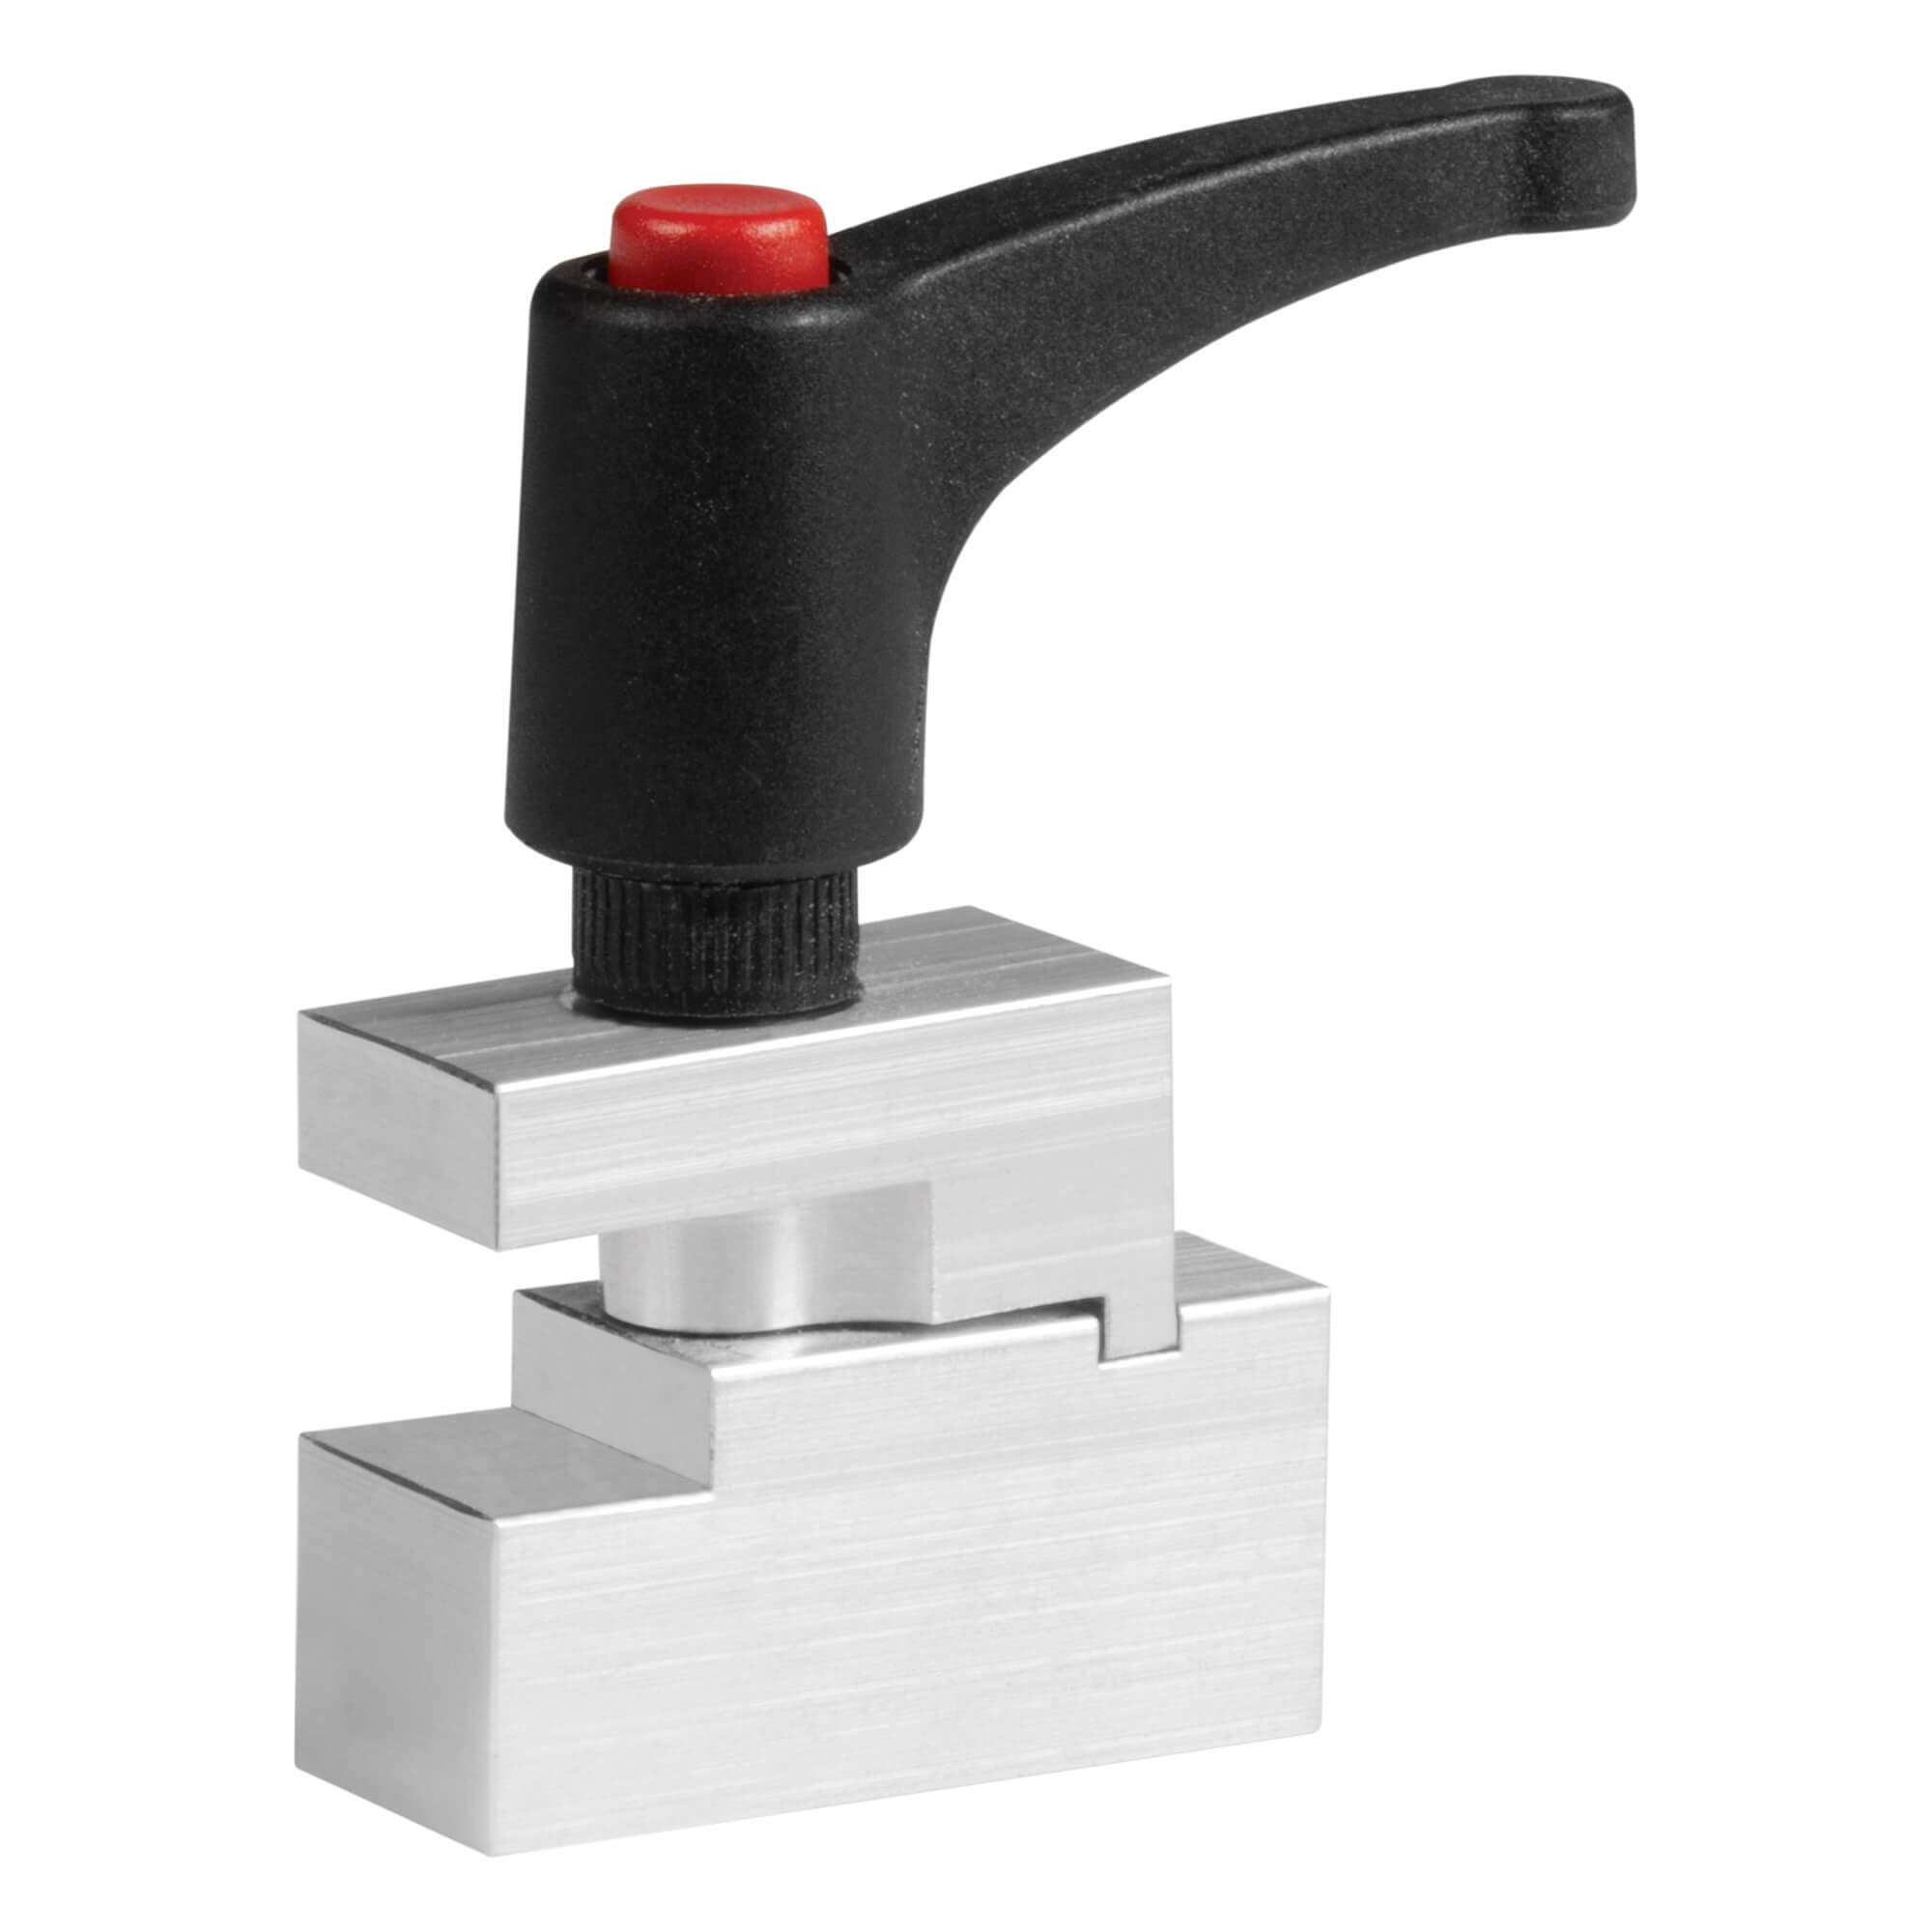 Image of Trend Worktop True Cut Worktop Jig Out of Square Accessory